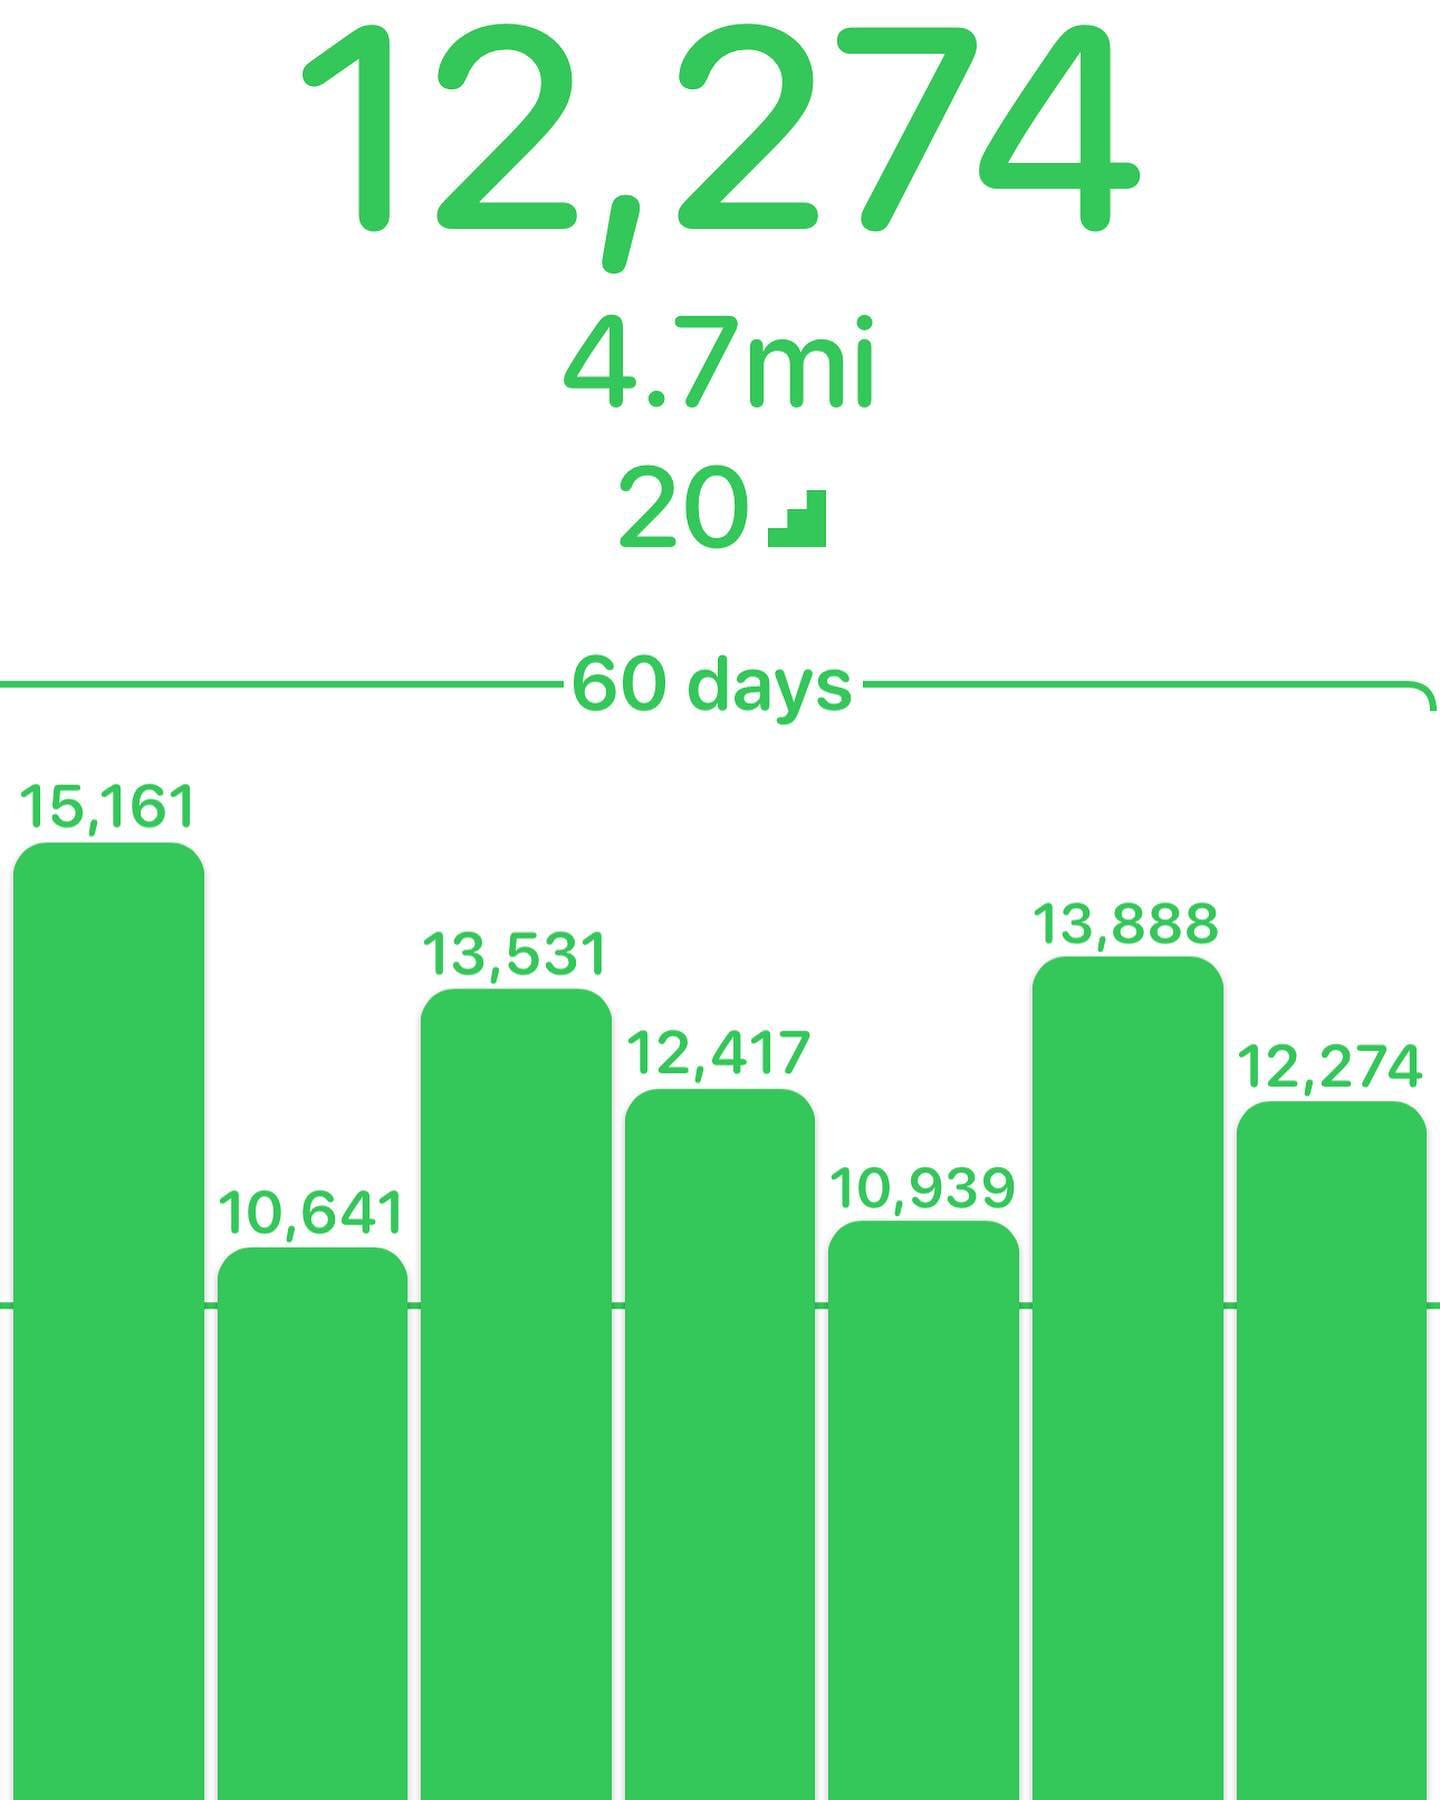 However, within the last 60 days, Al has gotten up to over 10K steps per day